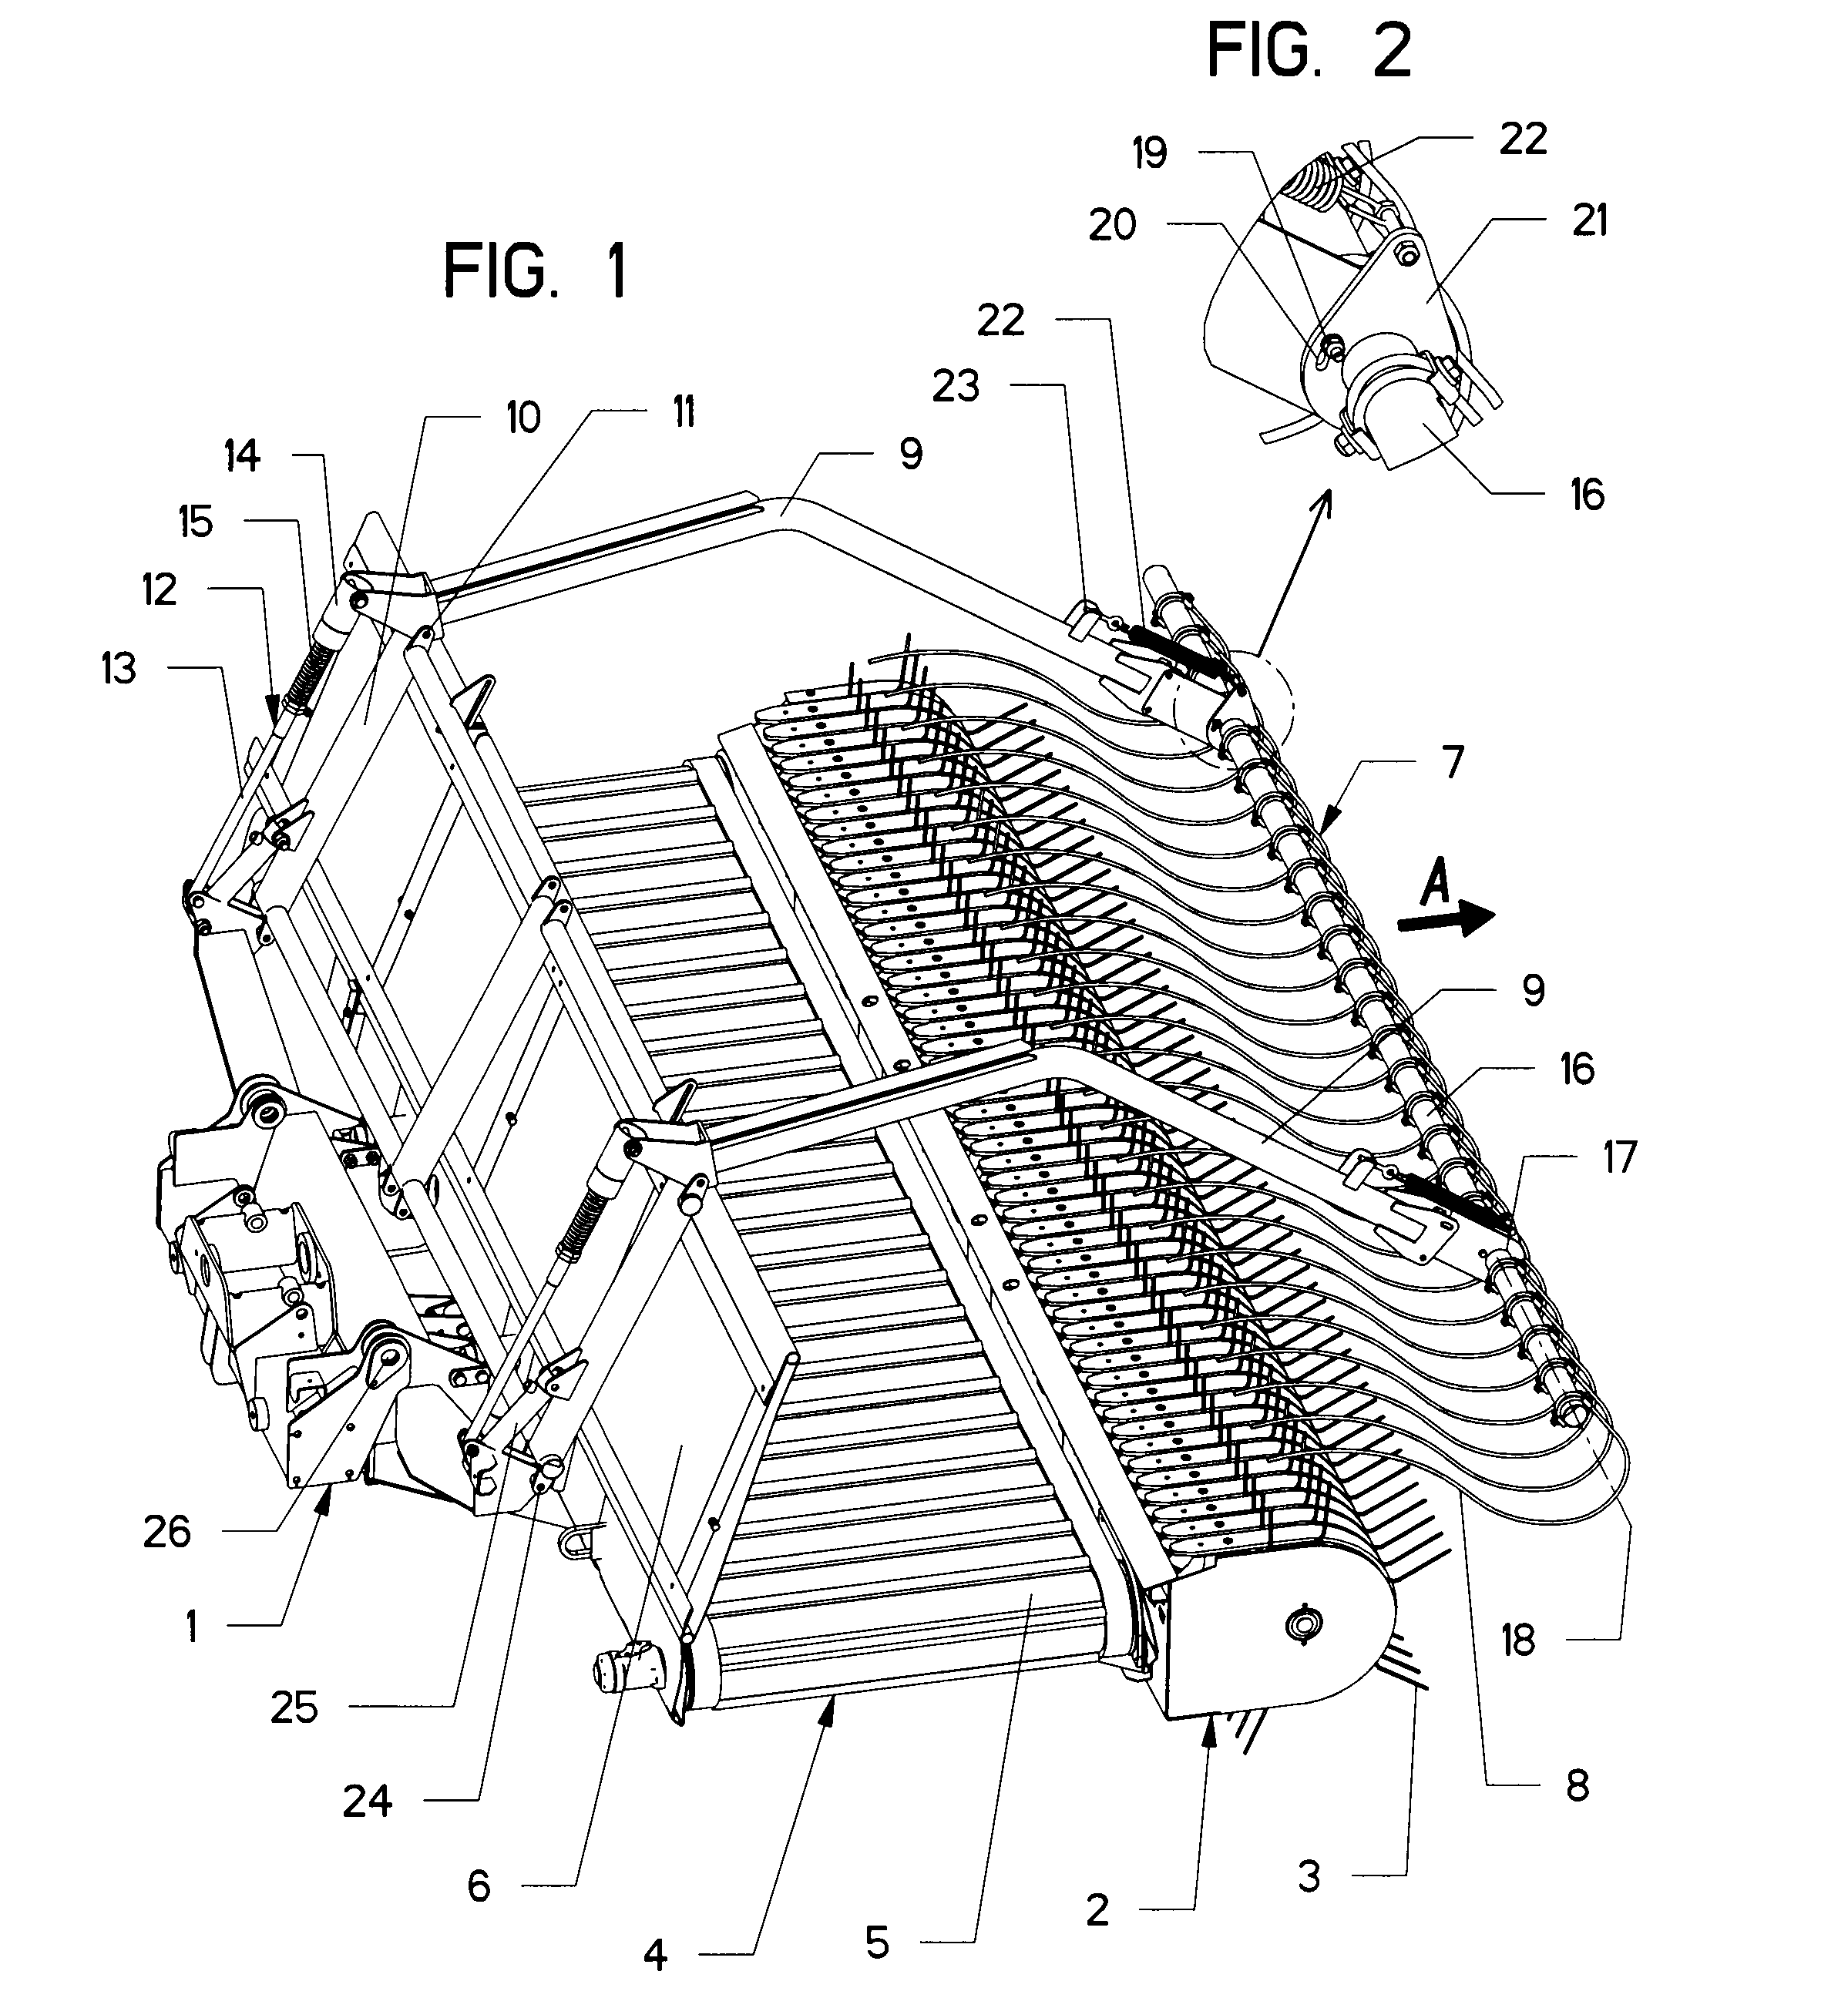 Guiding arrangement for forage pickup device of an agricultural harvester